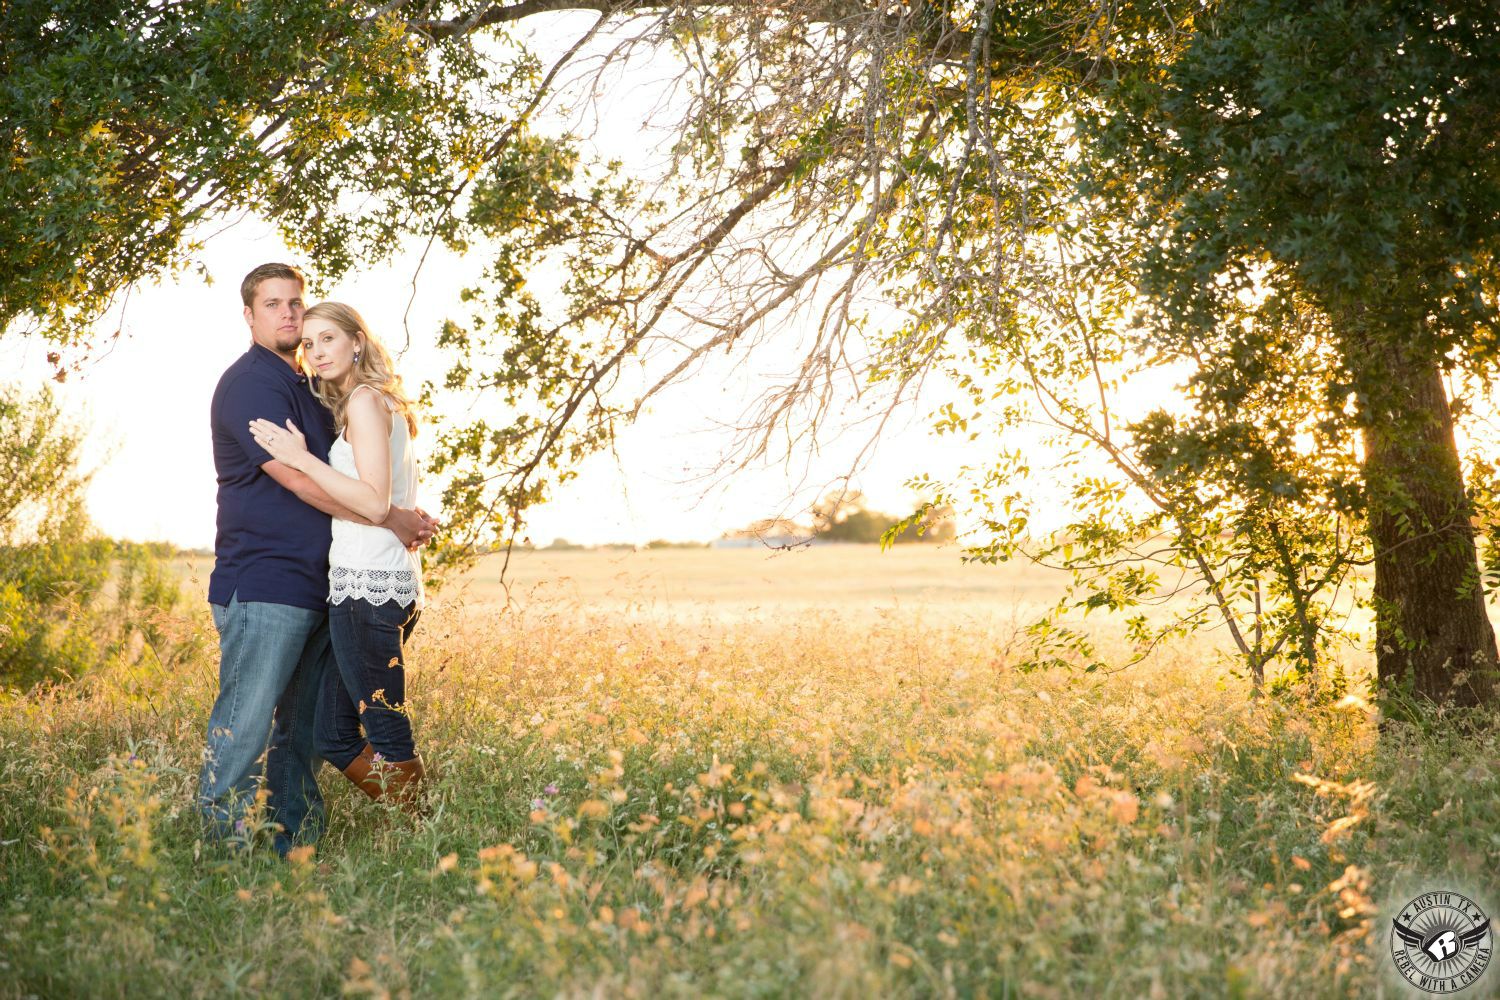 Wavy blond haired girl wearing a tank top with a lace fringe and blue jeans and boots softly hugs a sandy haired guy with a Van Dyke beard wearing a casual collared shirt with blue jeans under a green tree standing in a golden field of tall grass in Round Rock in this soft engagement image in a suburb or Austin, TX.